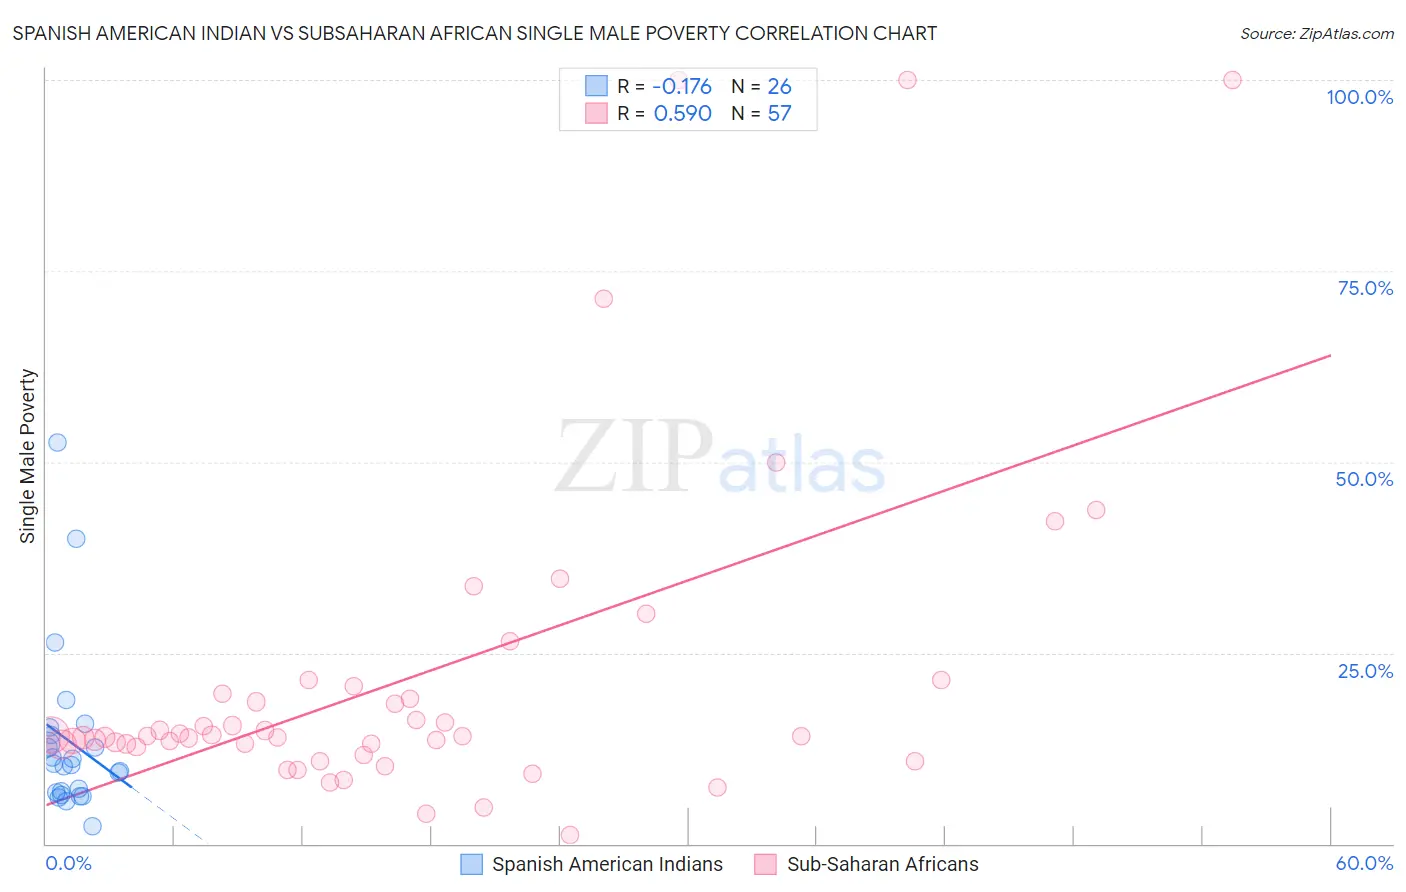 Spanish American Indian vs Subsaharan African Single Male Poverty